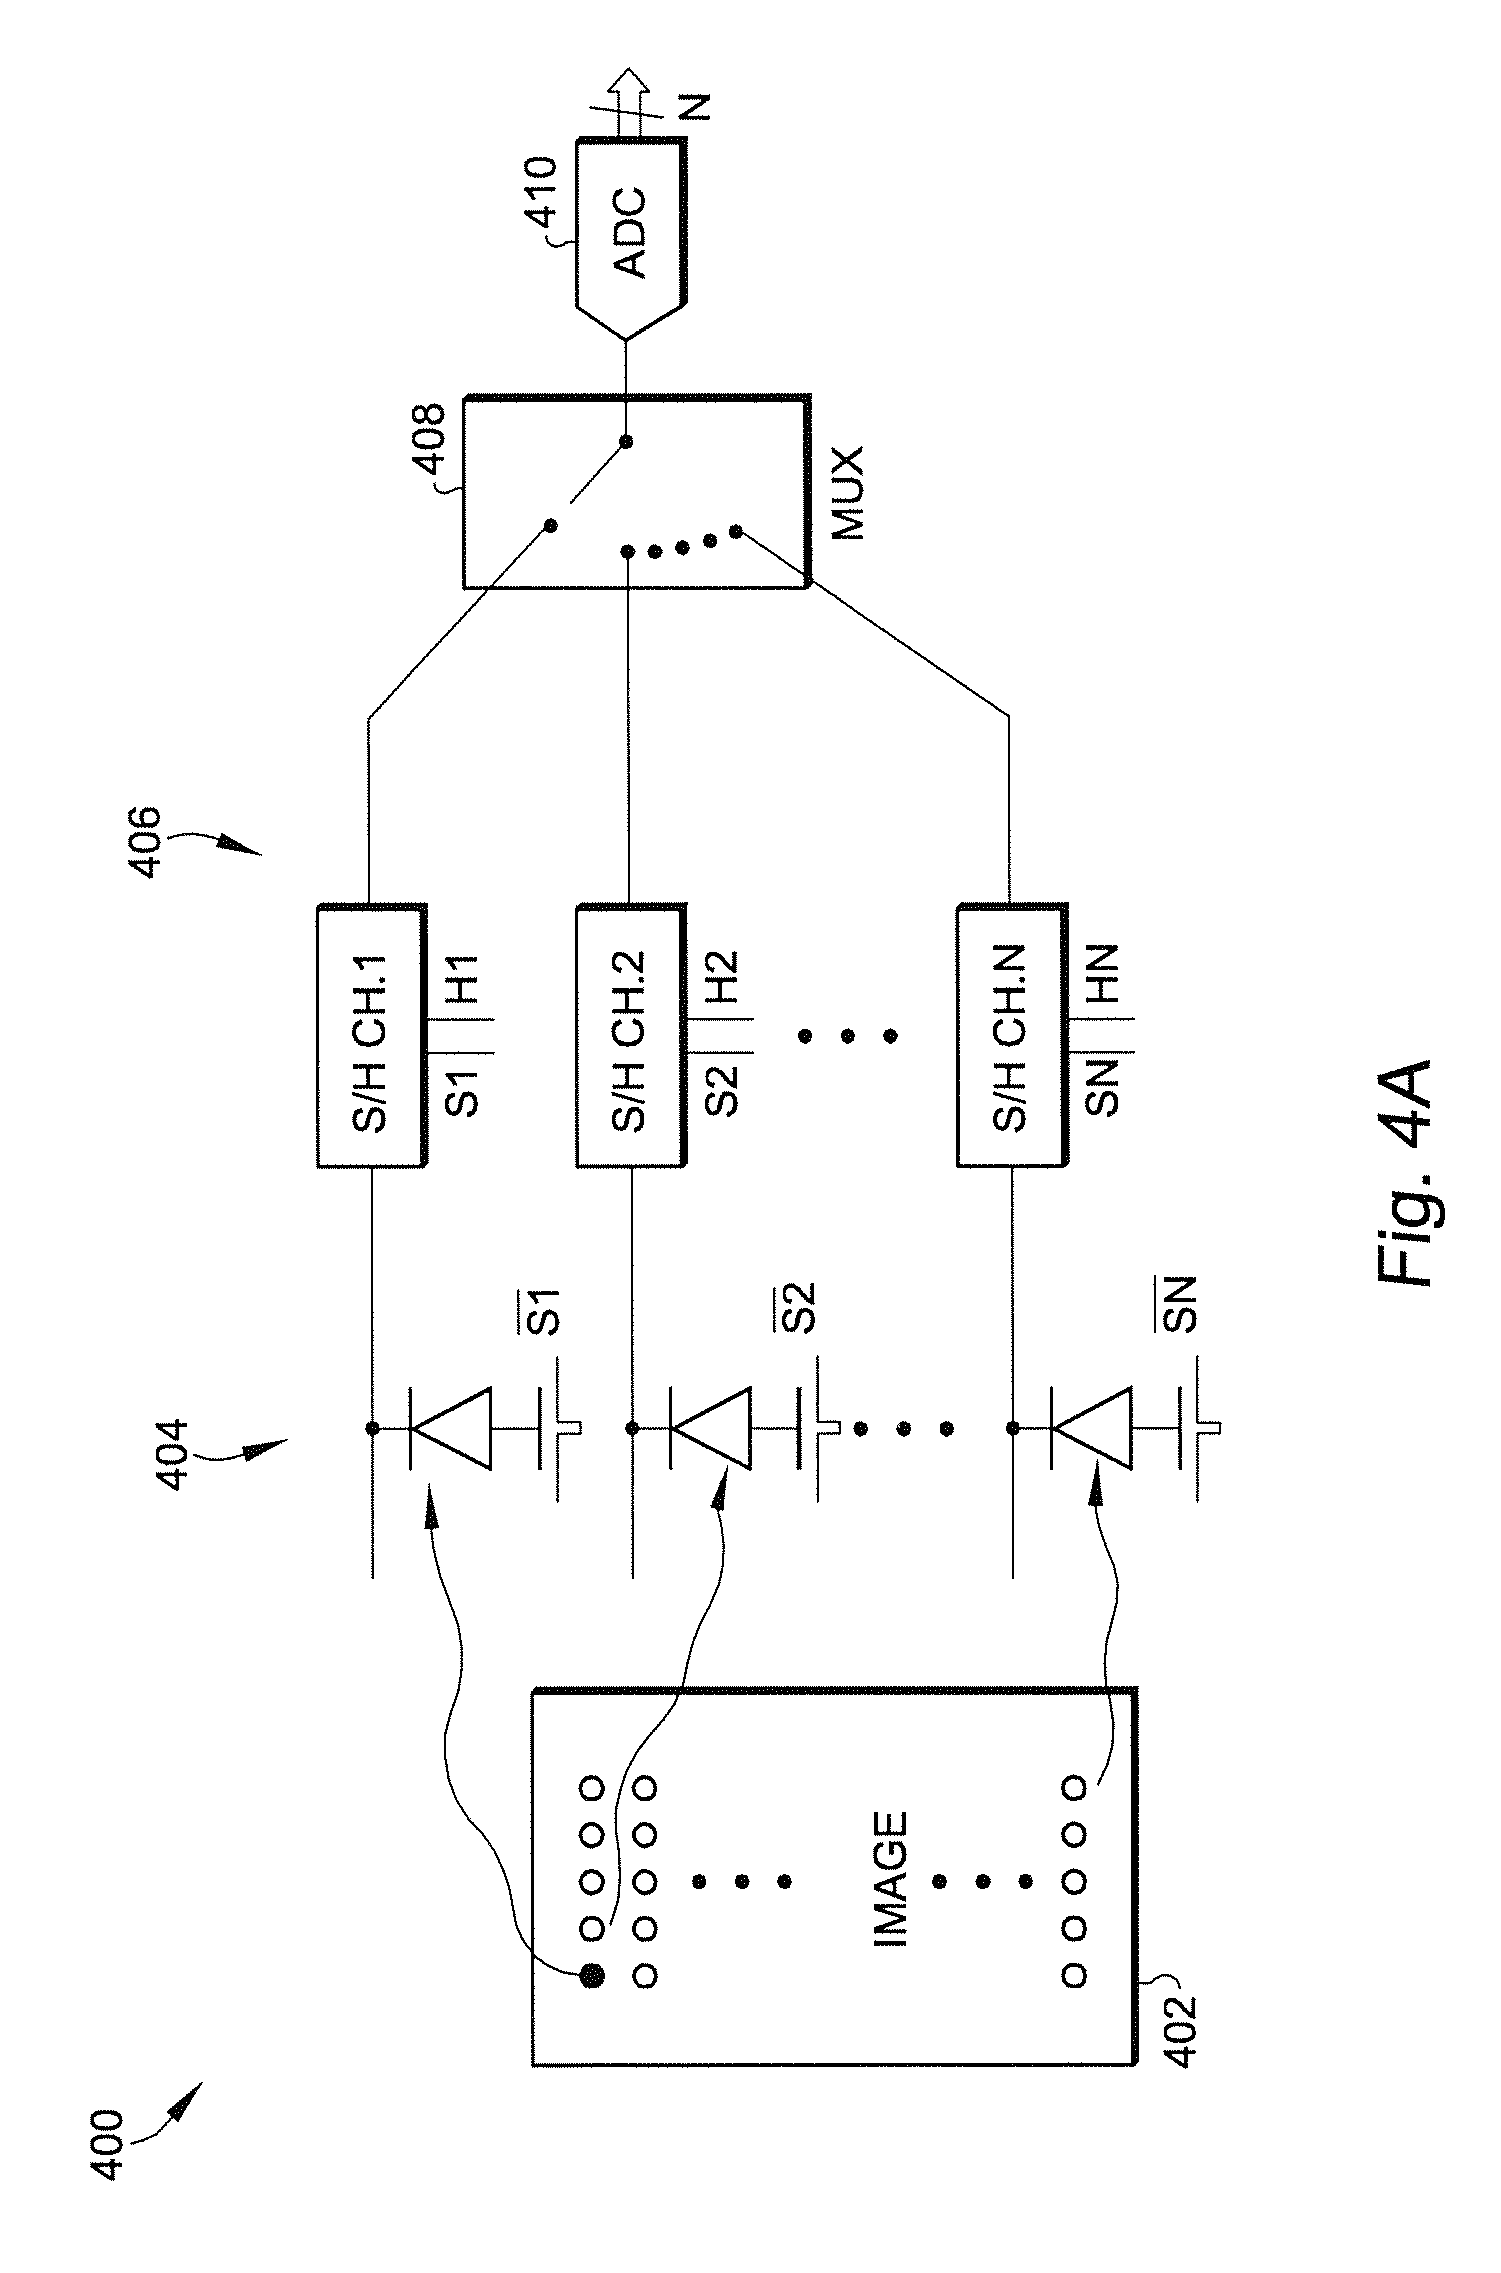 Low-noise low-distortion signal acquisition circuit and method with reduced area utilization